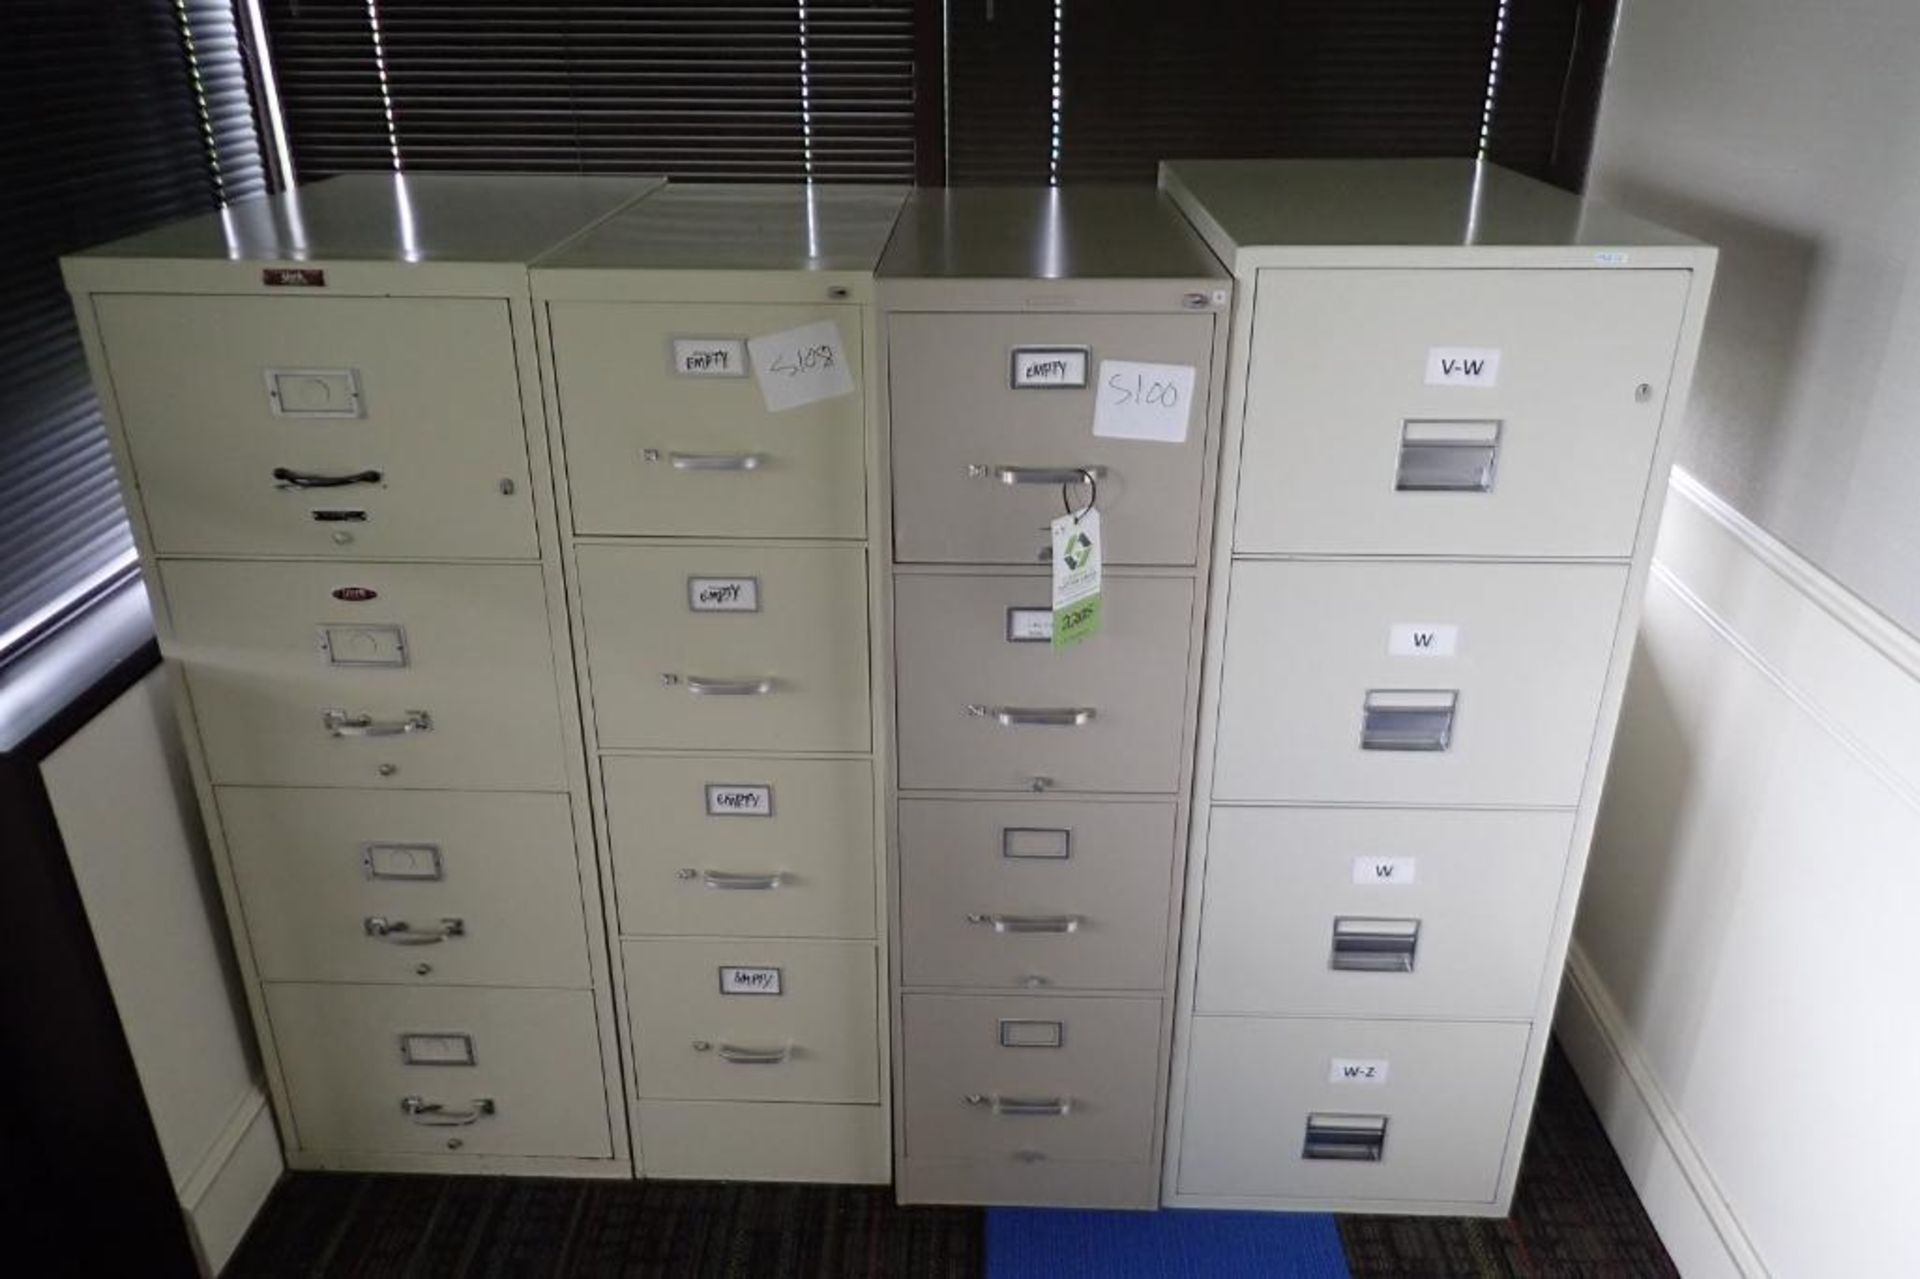 Vertical filing cabinets